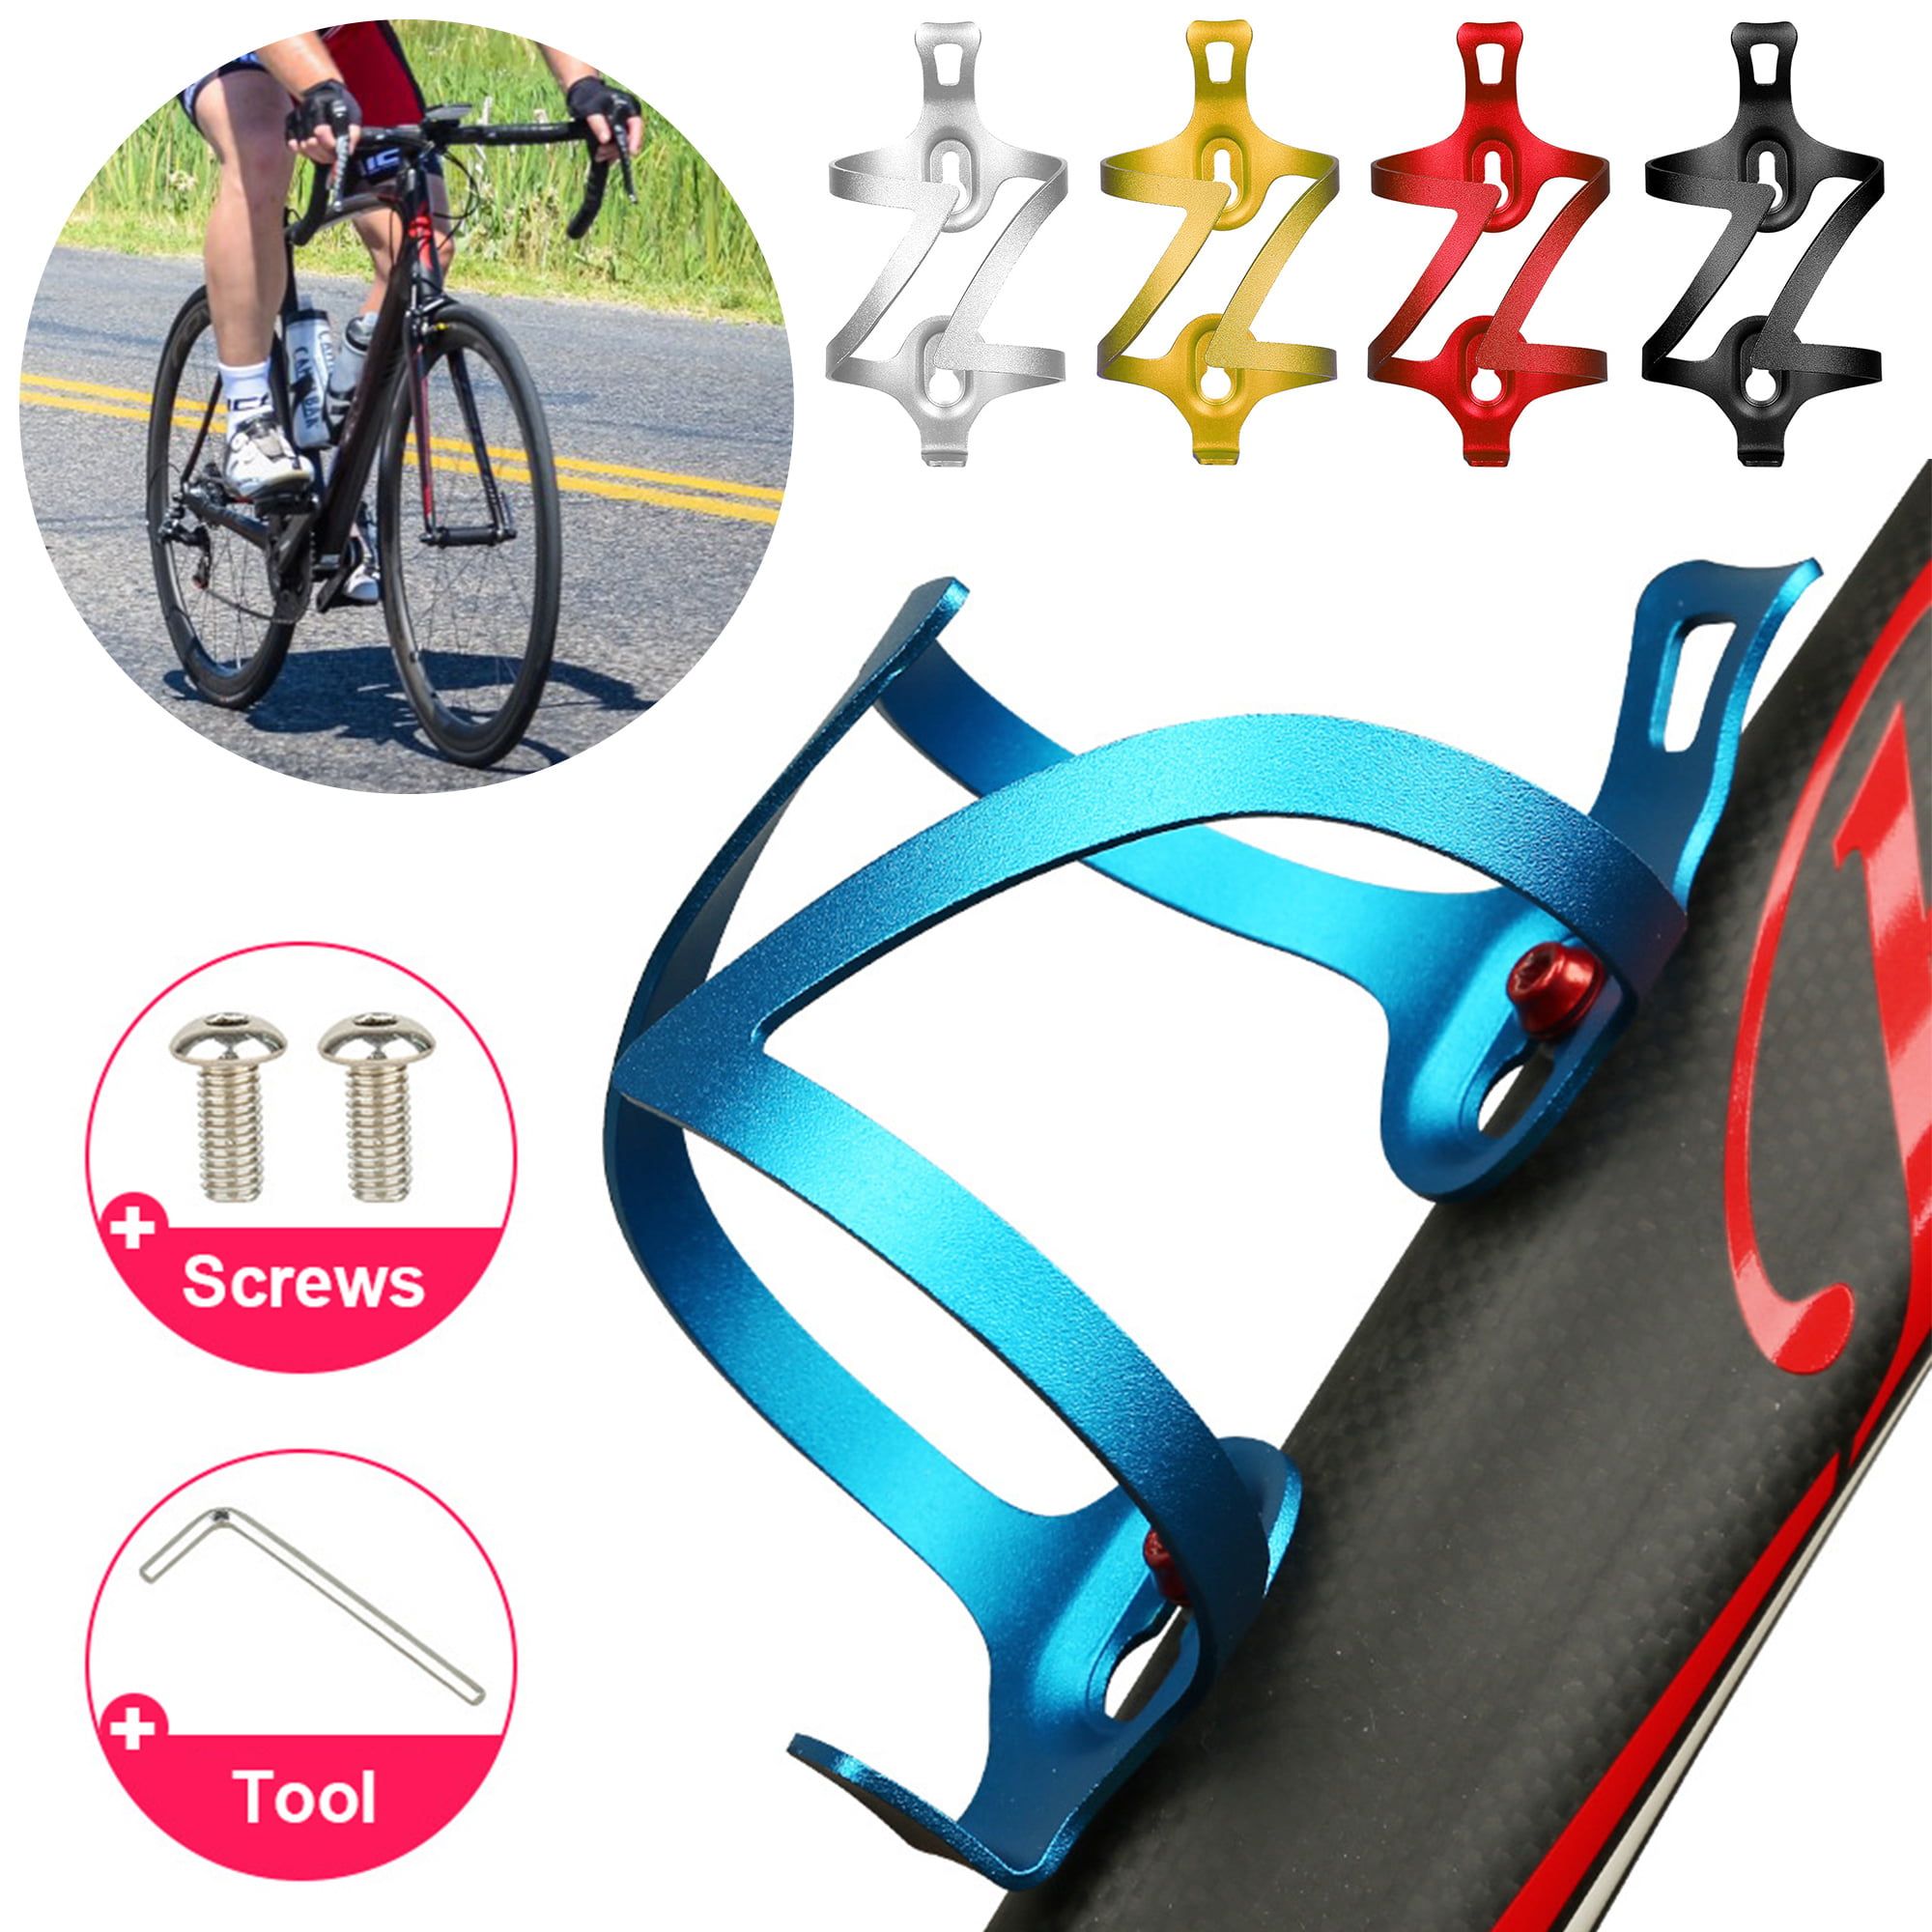 1x Mountain Bike Bottle Cages Rack Aluminum Bicycle Cycling Water Bottle Holder 